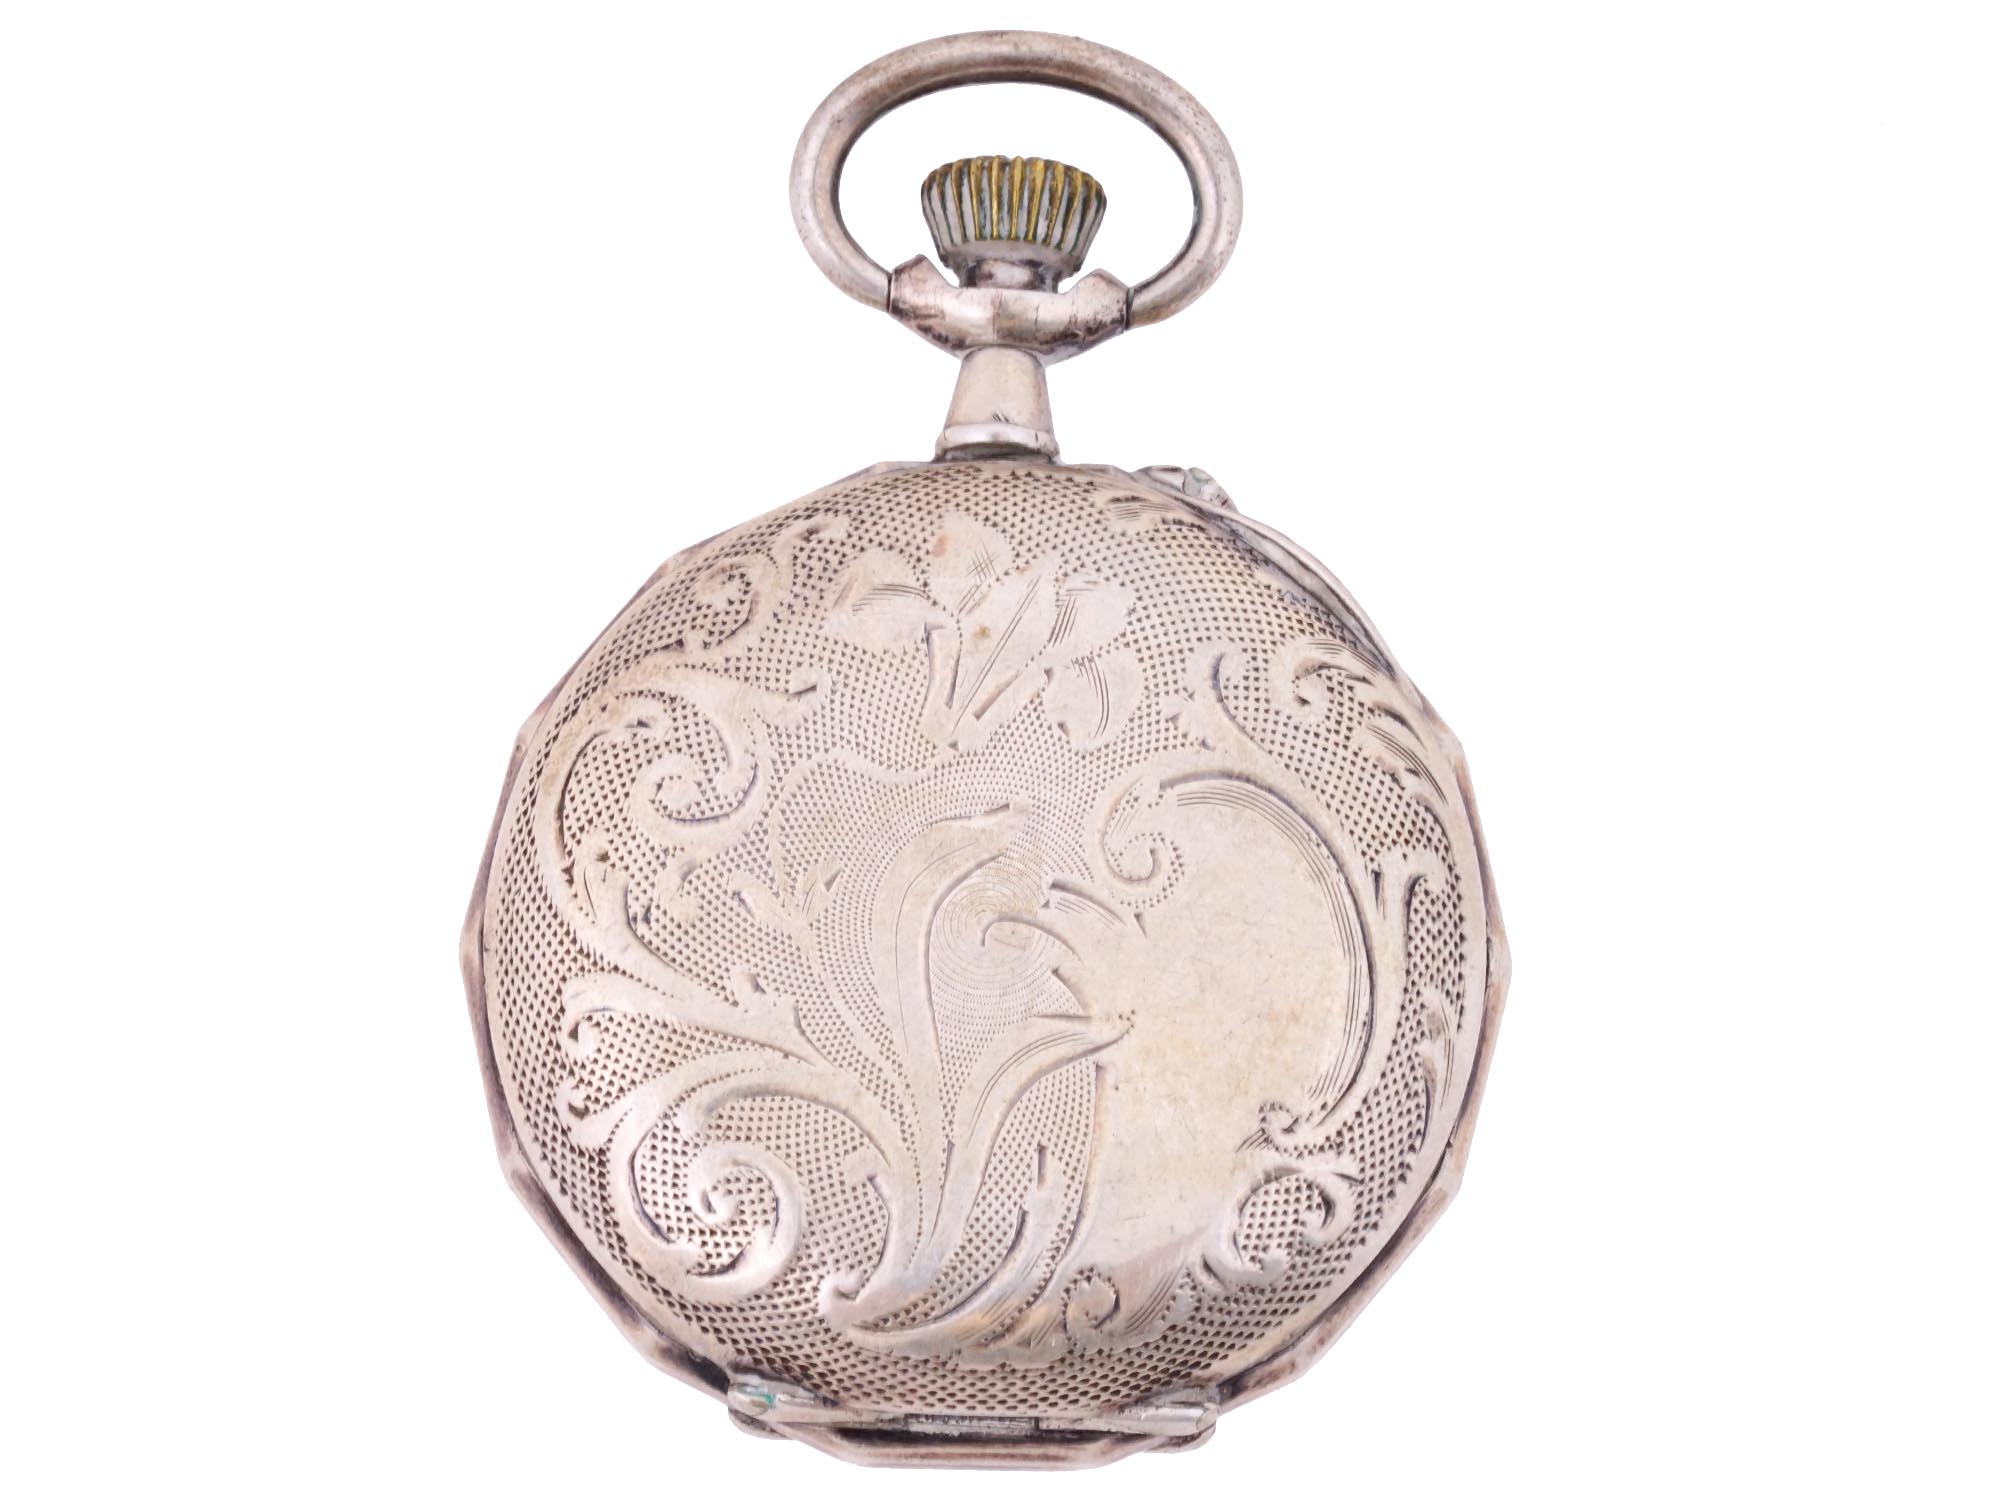 ANTIQUE EARLY 20TH C FRENCH SILVER POCKET WATCH PIC-2